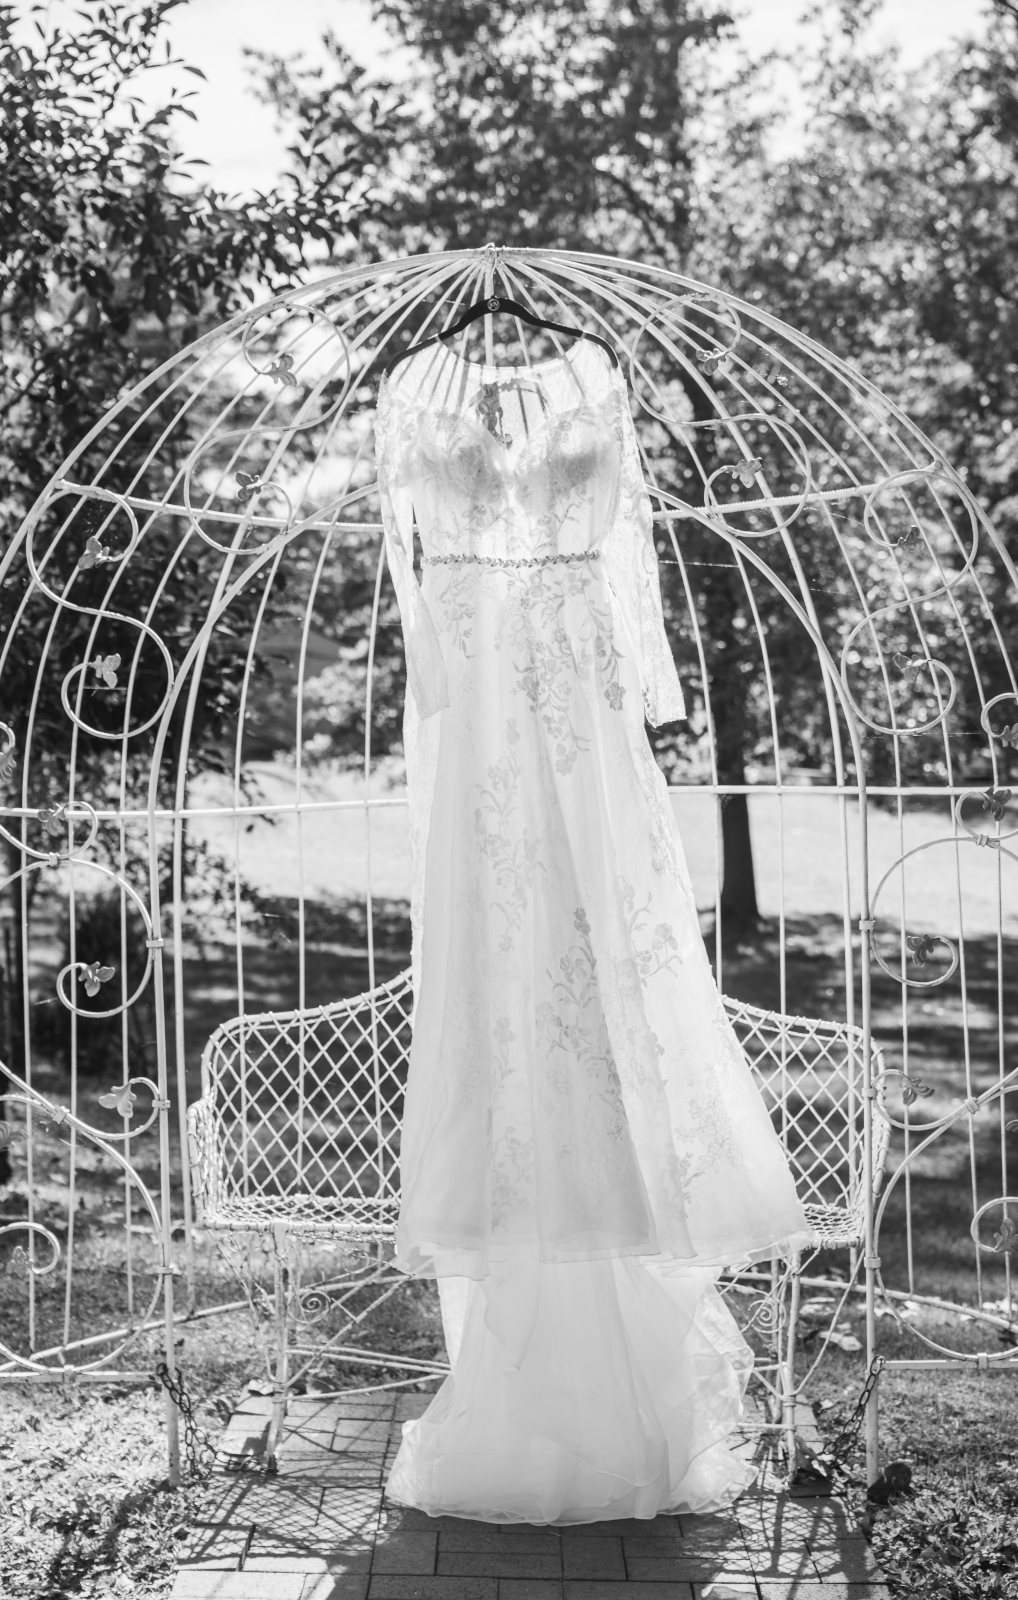 Wedding dress, unique wedding dress photo, metal bench, metal arch, black and white, classic, beautiful, fall wedding, cute outdoor wedding ceremony at Grand Pacific Wedding Gardens